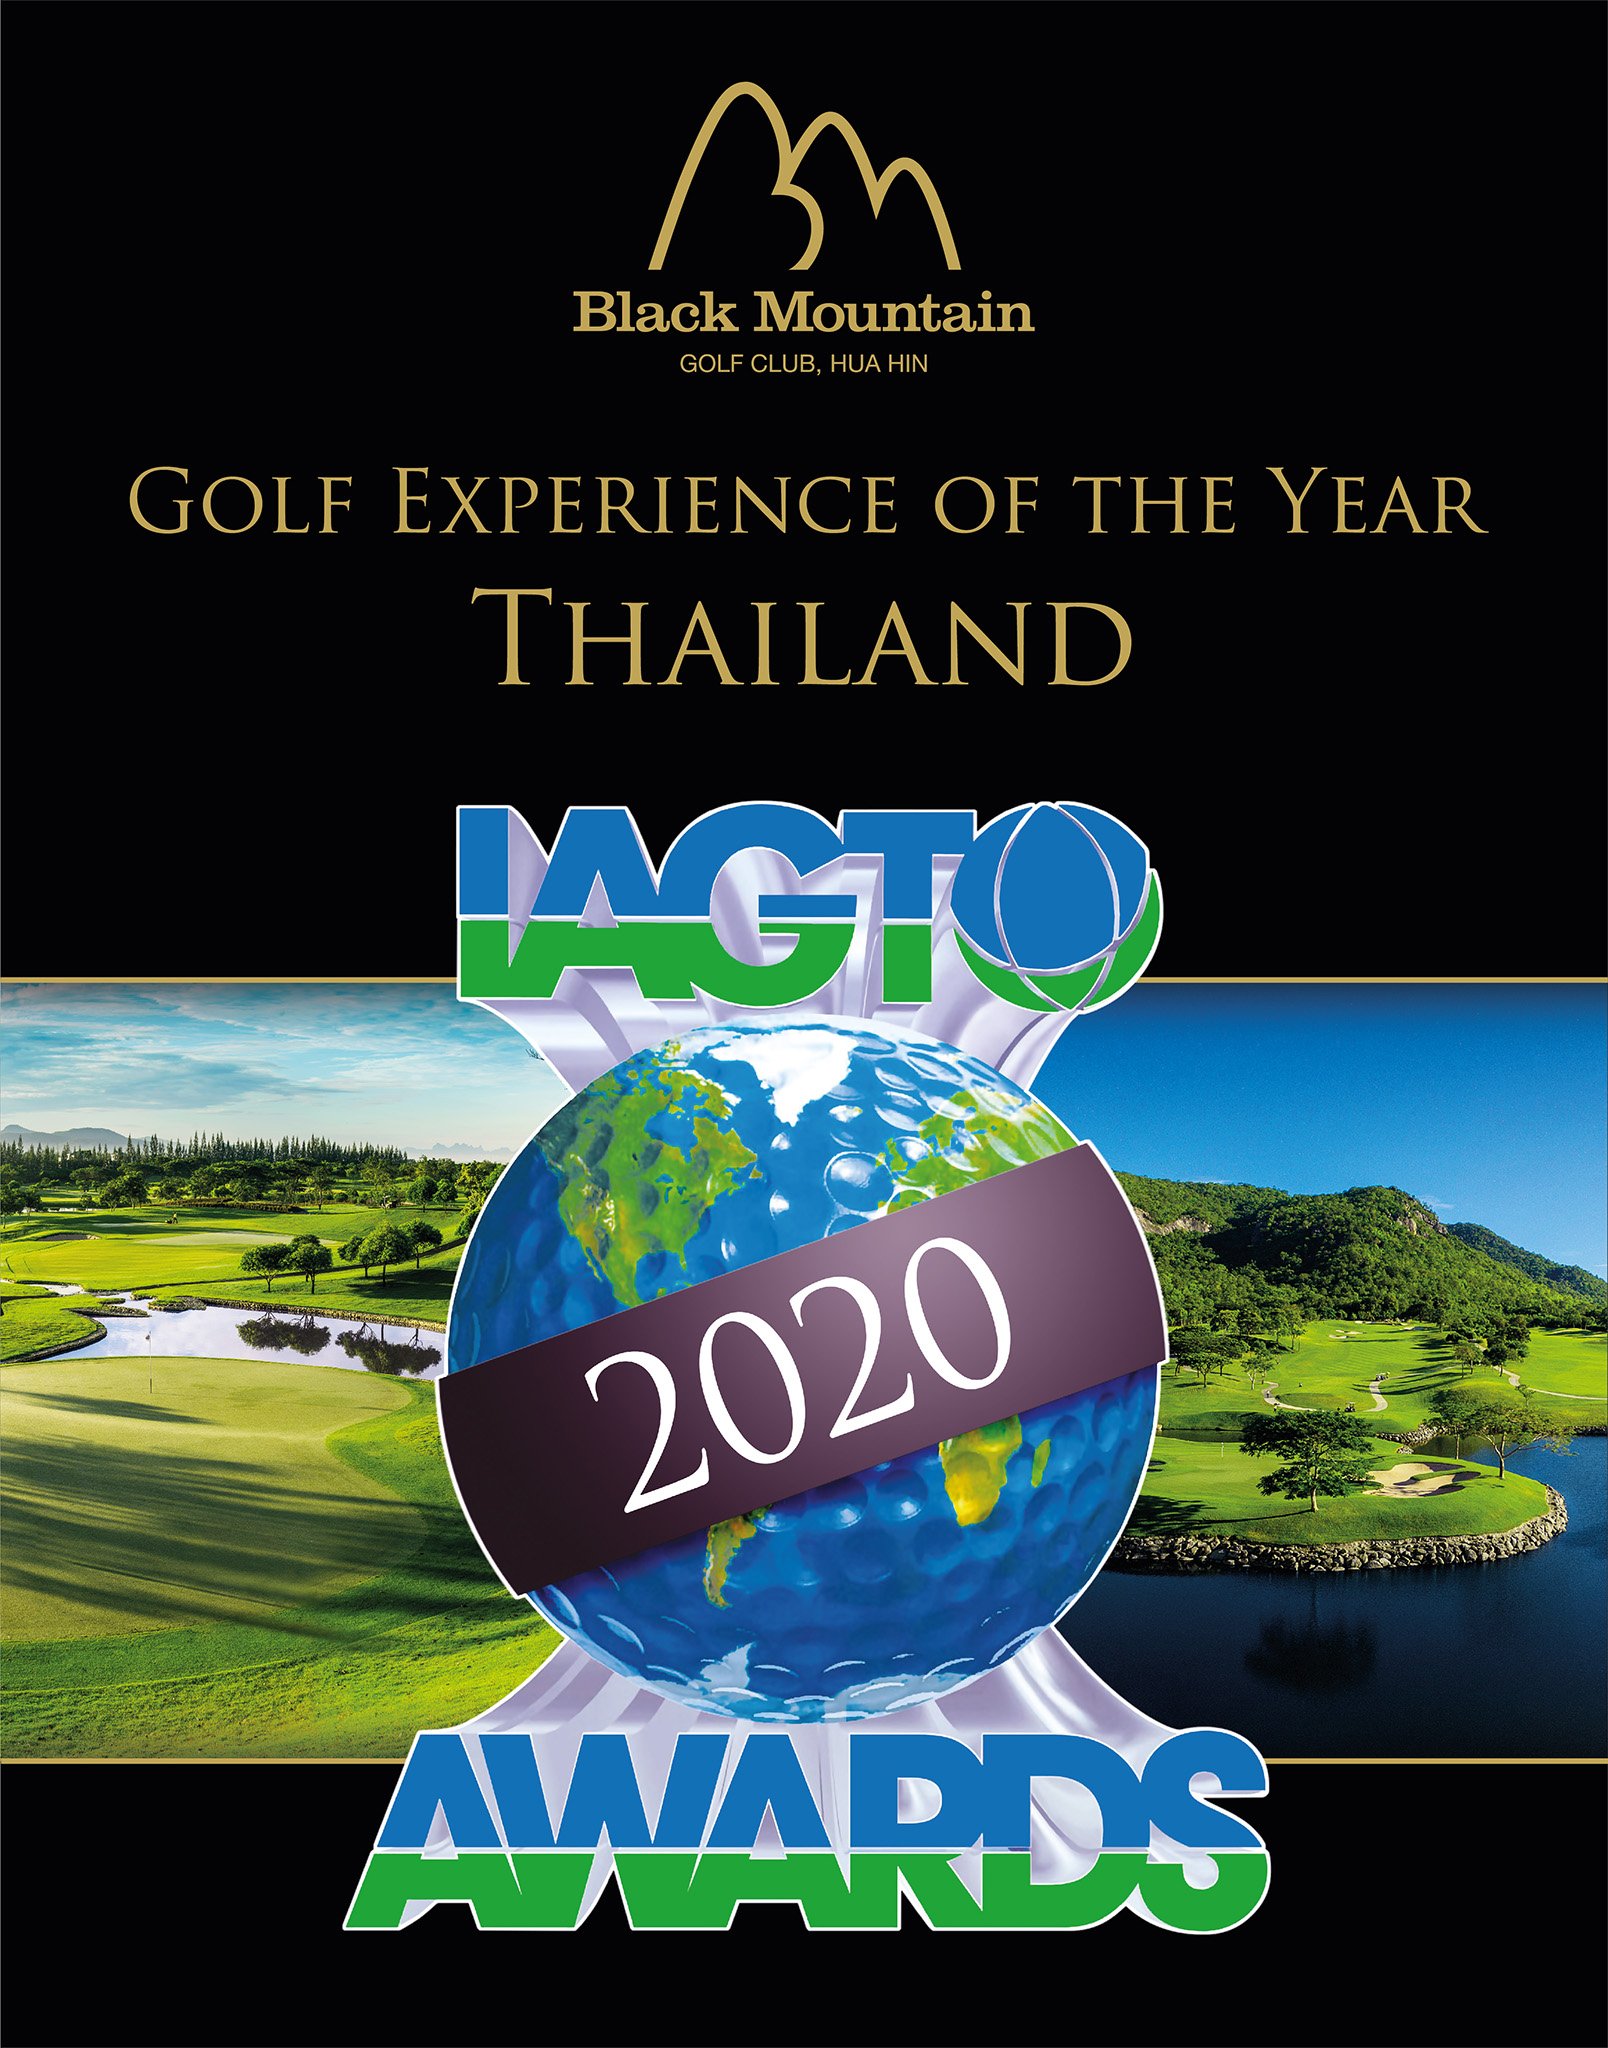 Black Mountain Wins Best Golf Experience In Thailand At Iagto Awards